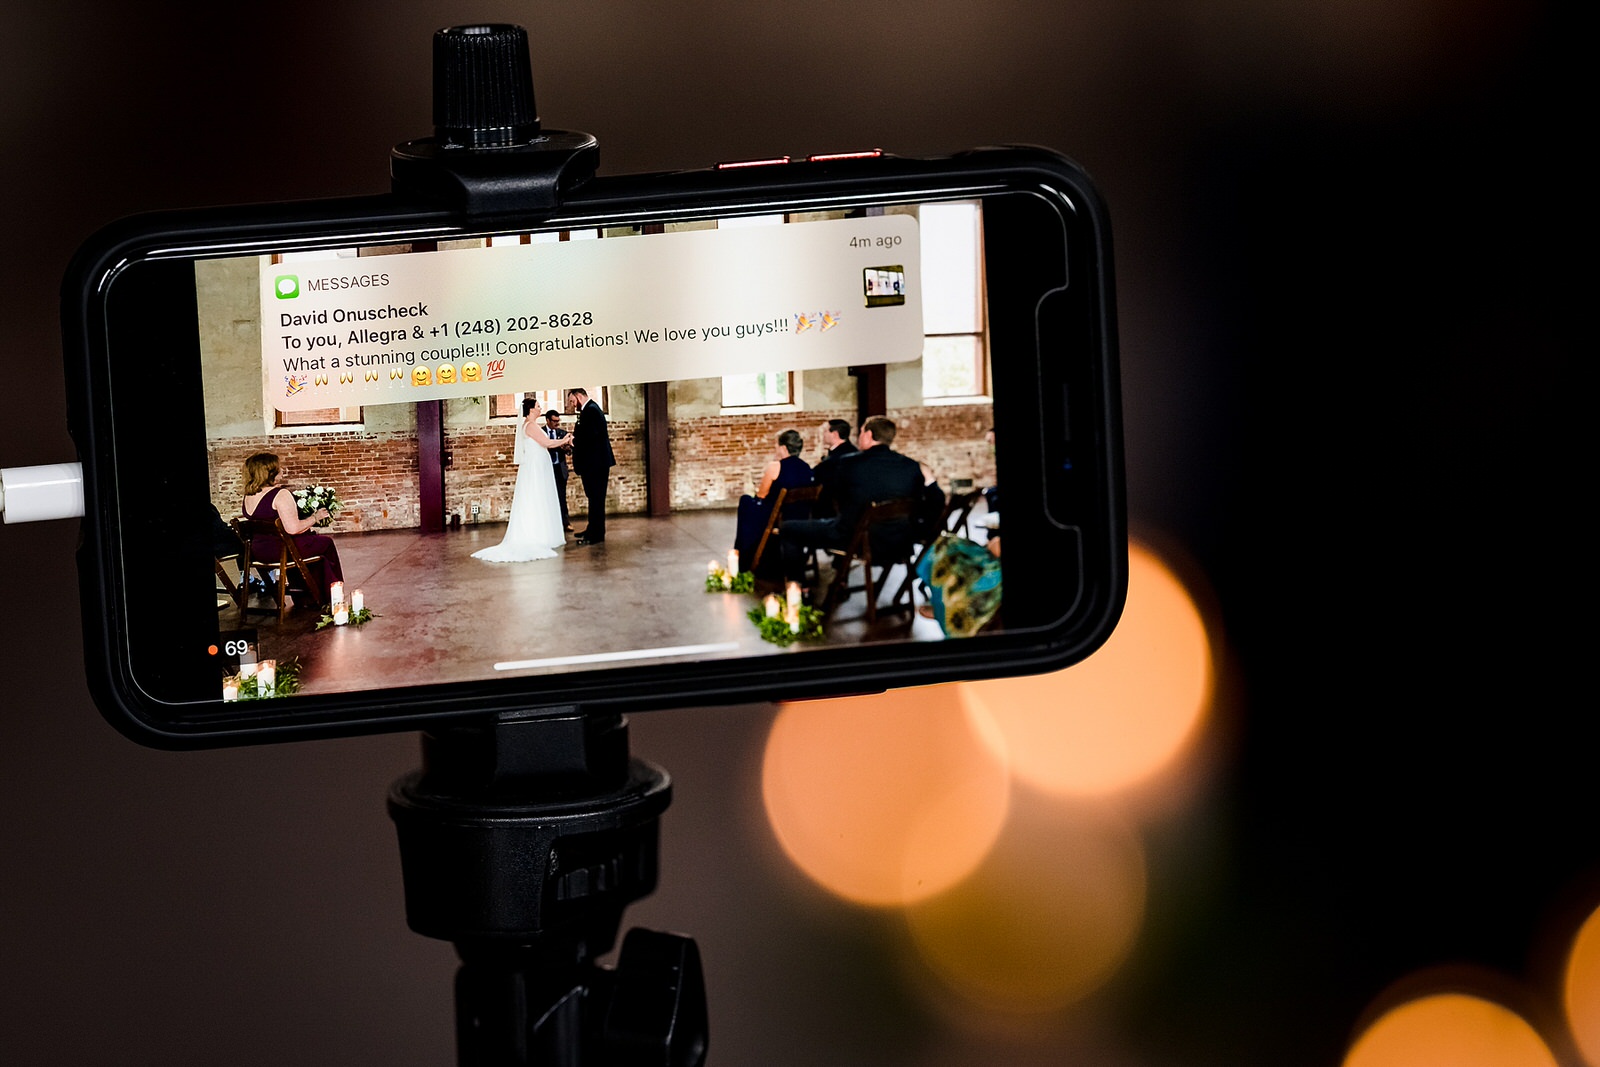 Weddings are being livestreamed in the days of Covid19